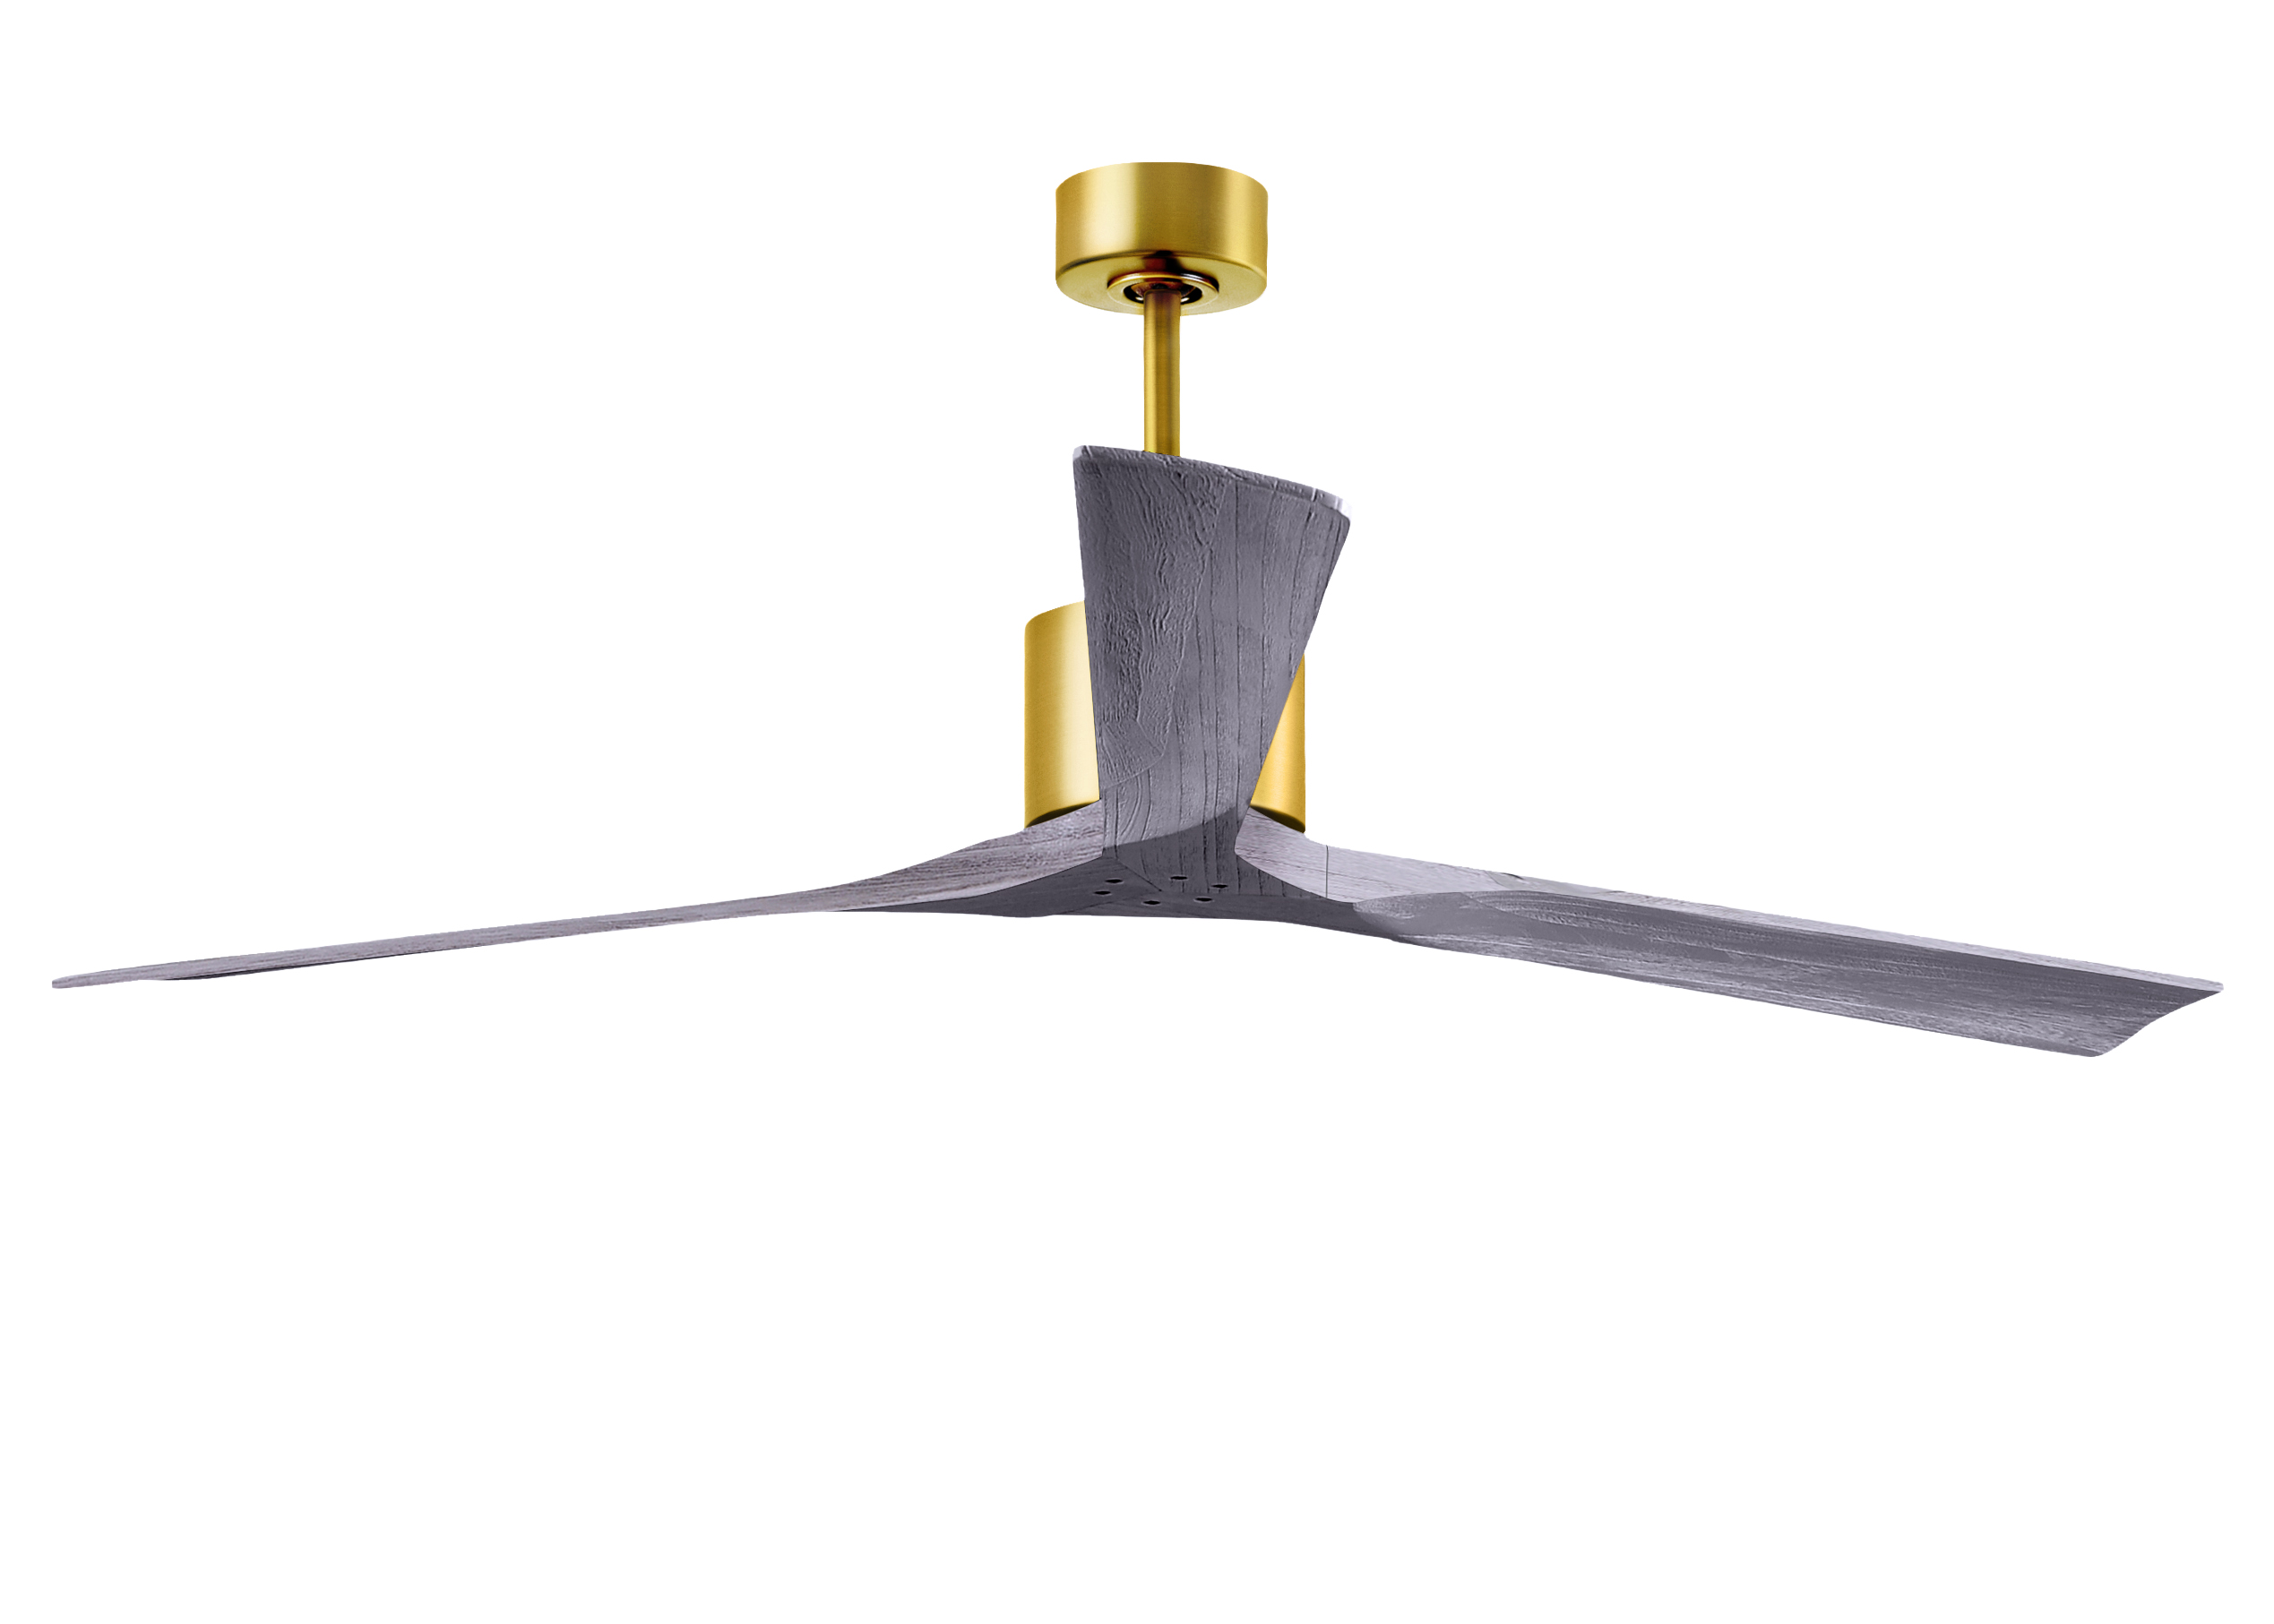 Nan XL Ceiling Fan in Brushed Brass with 72” Barn Wood Blades